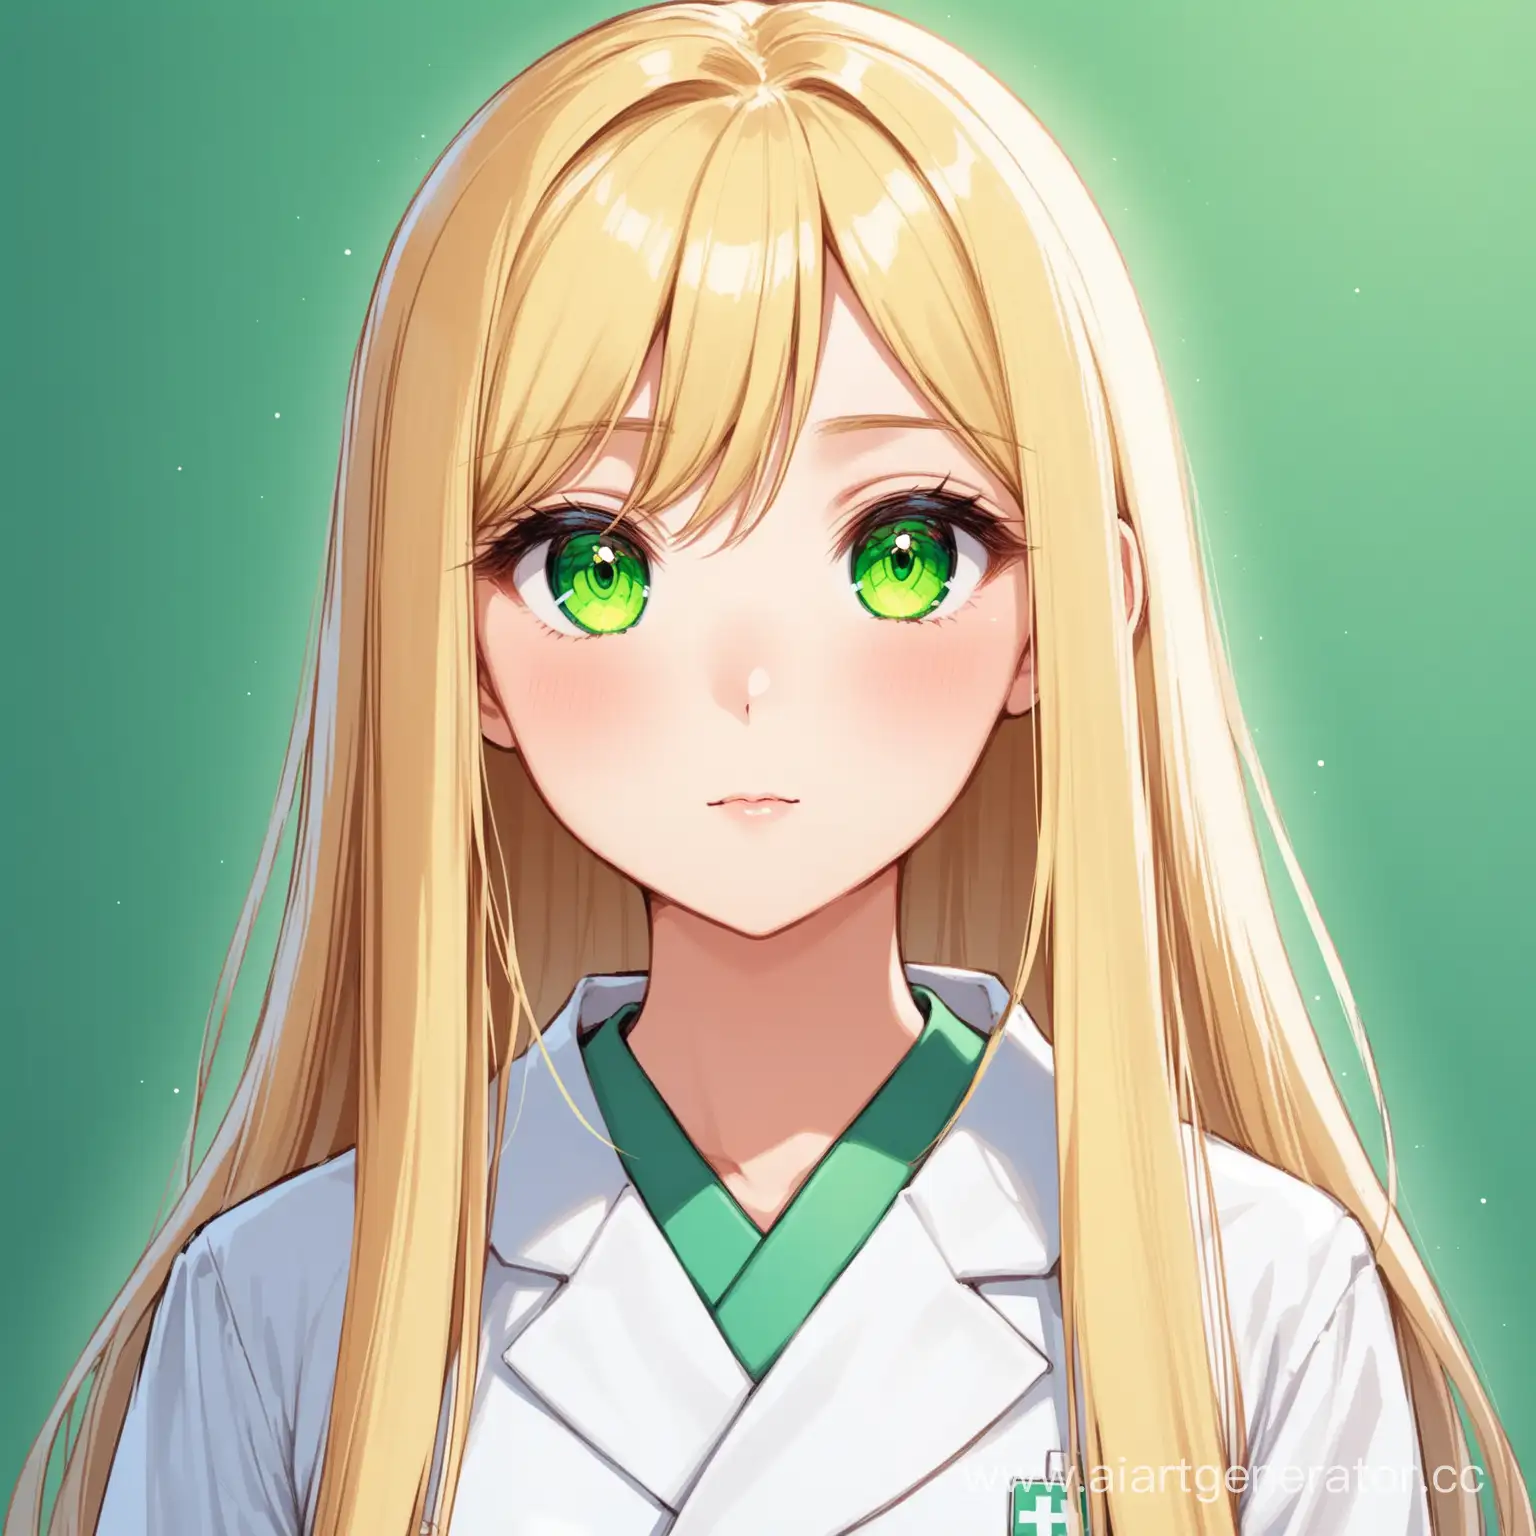 Young-Girl-with-Blonde-Hair-and-Green-Eyes-in-Medical-Dress